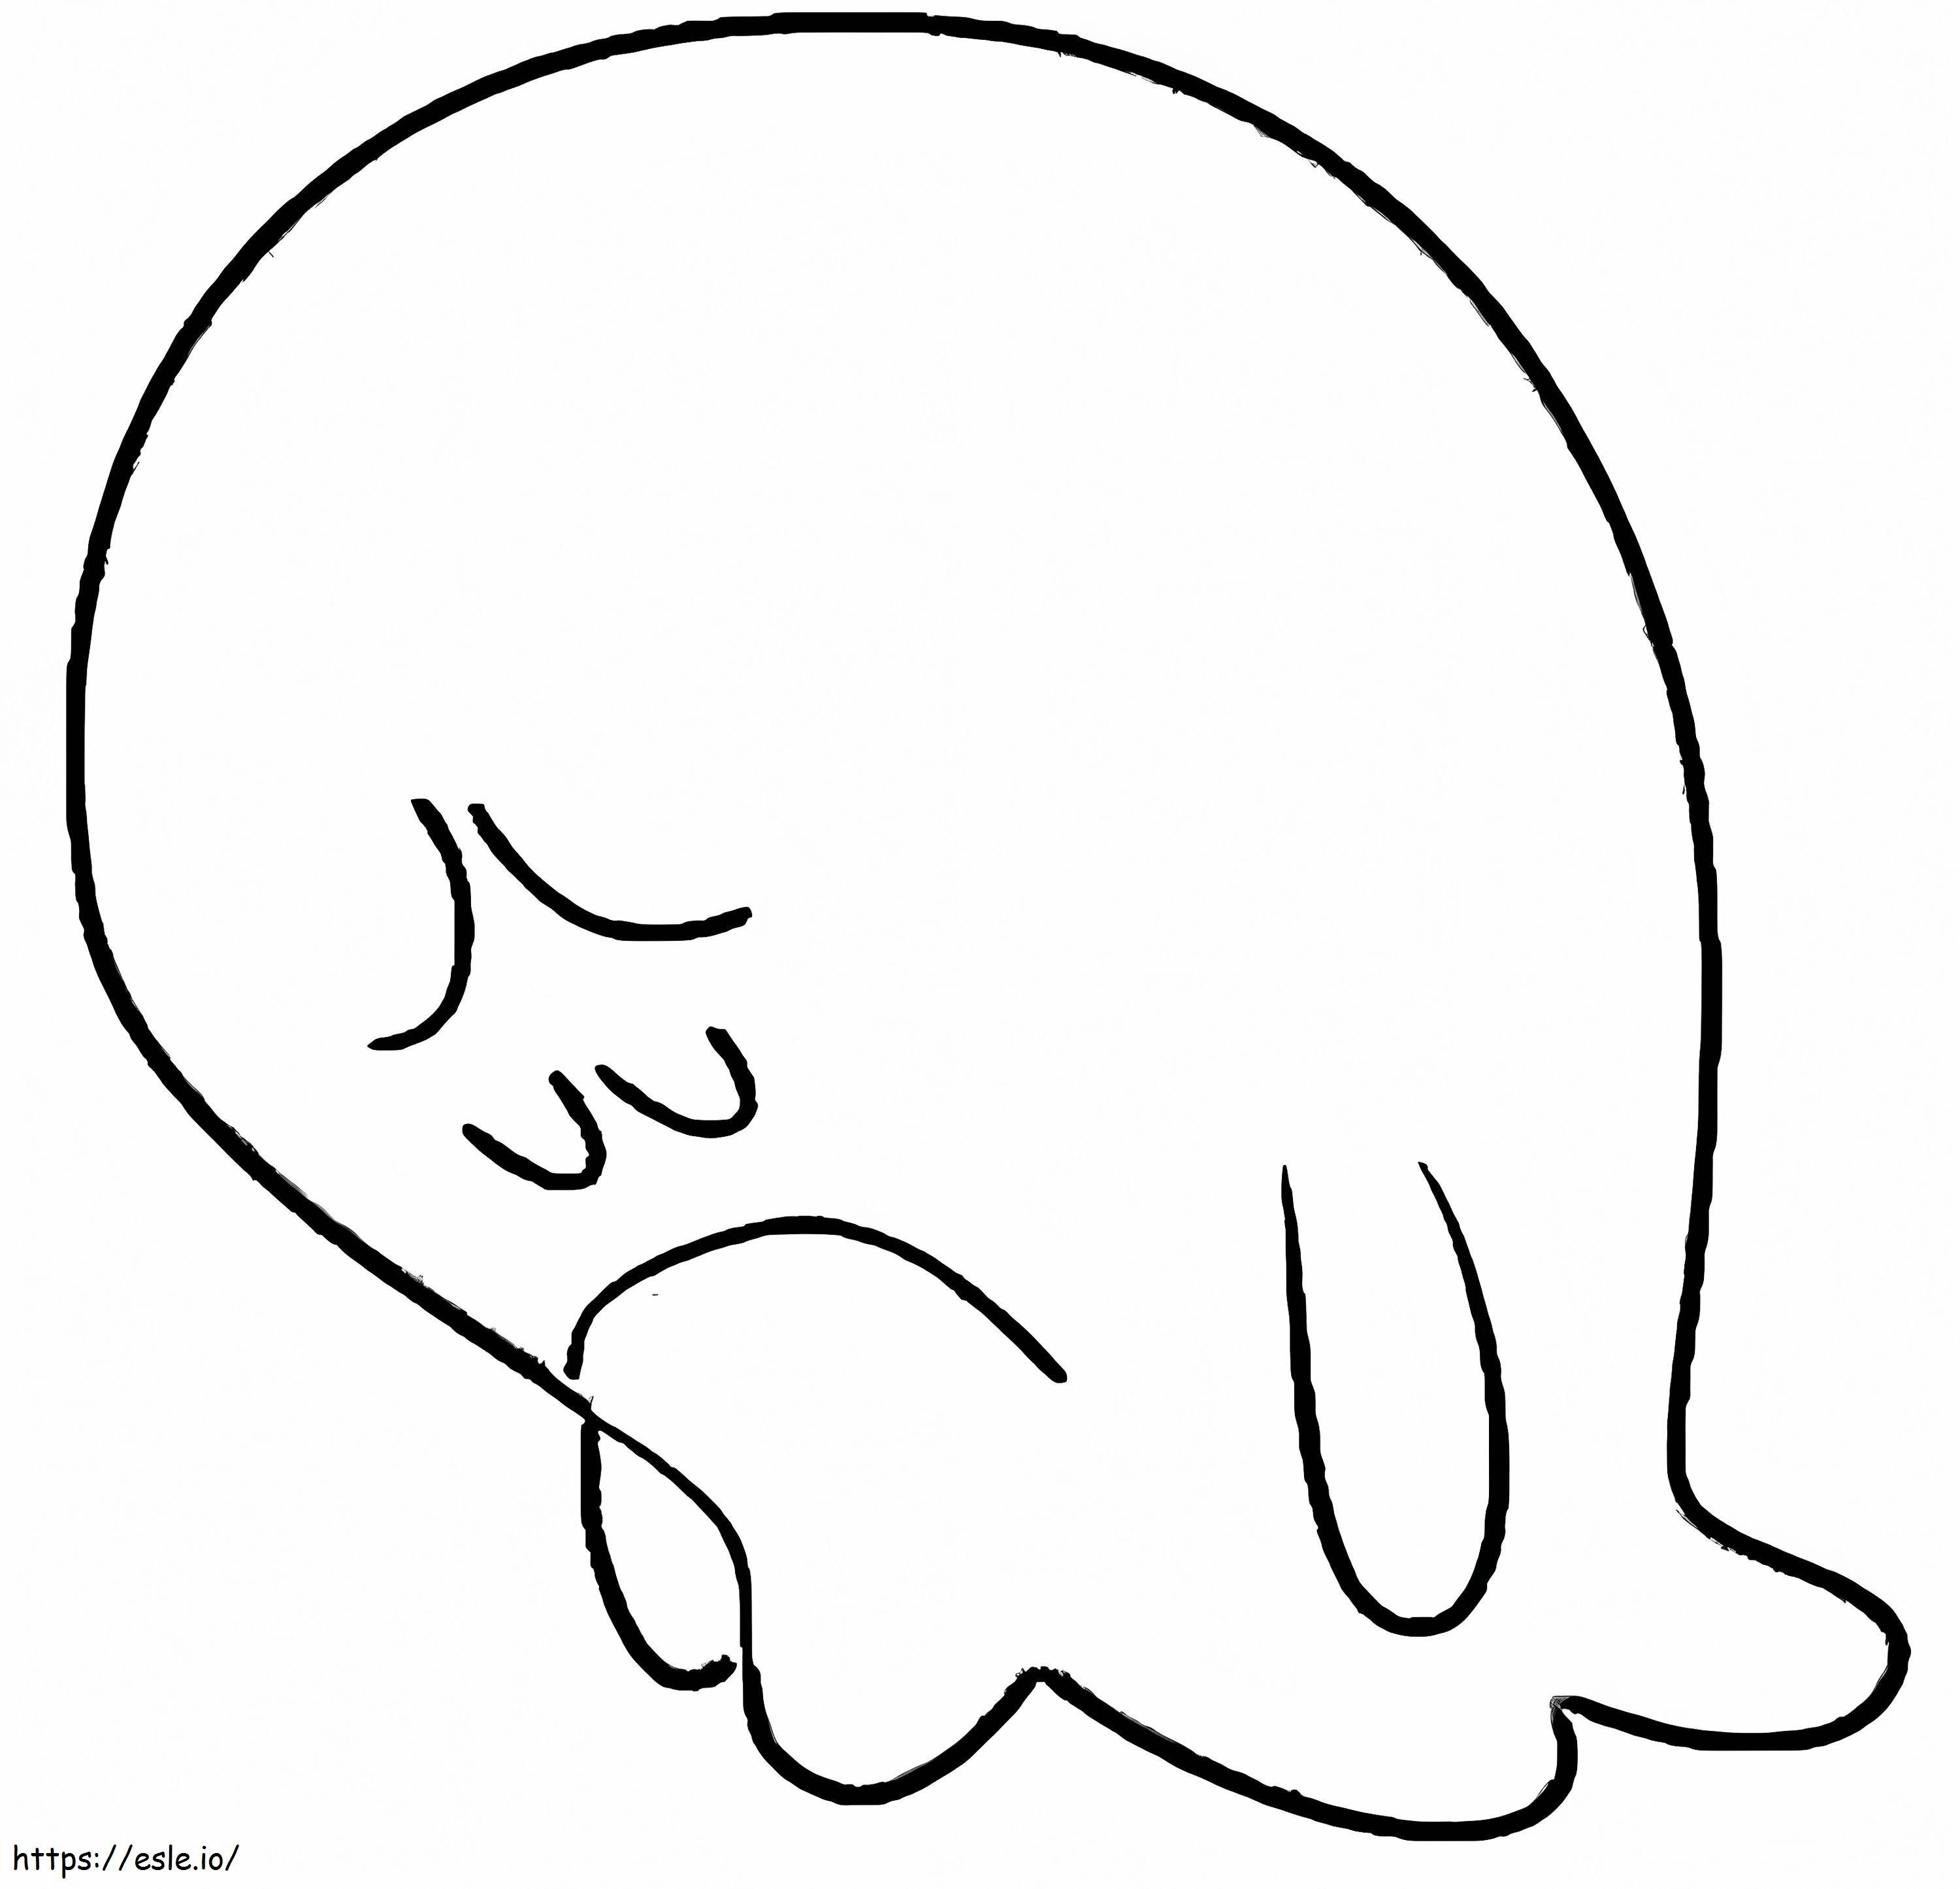 Sad Lamps coloring page